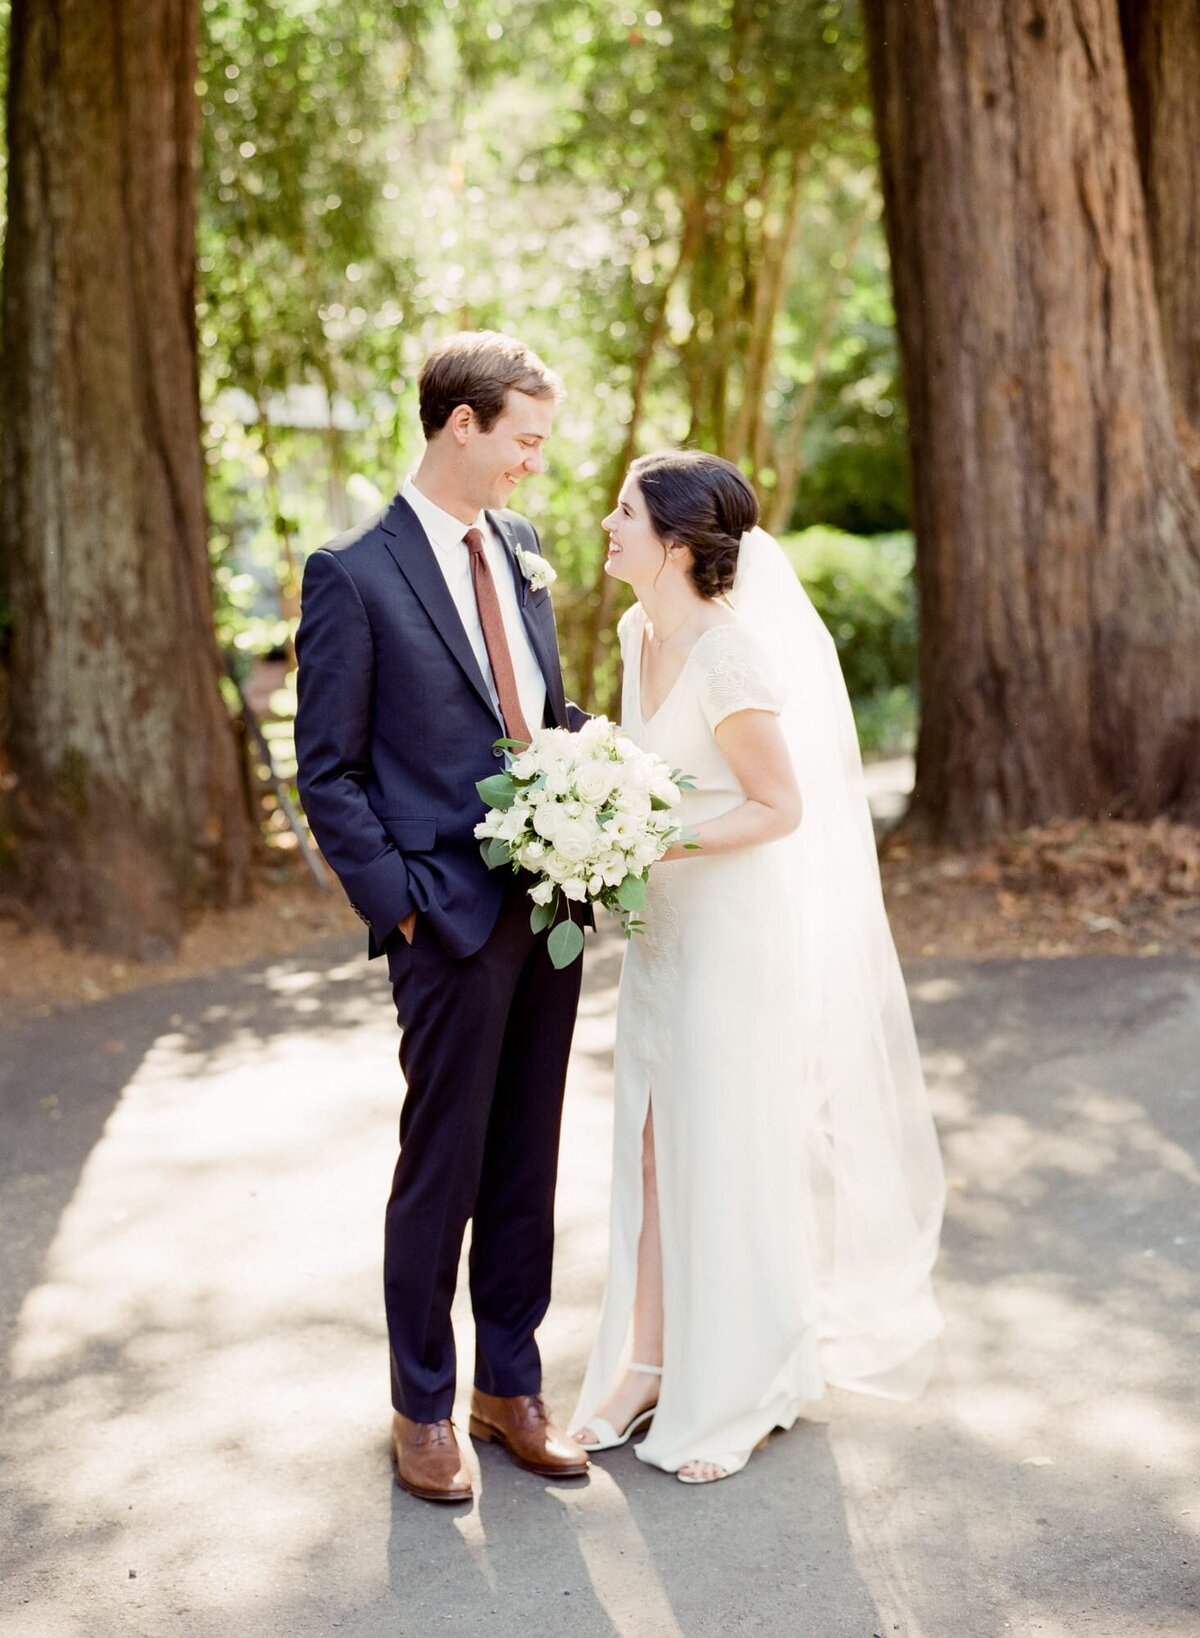 Beautiful couple look into each others' eyes at a memorable forest wedding in Washington.